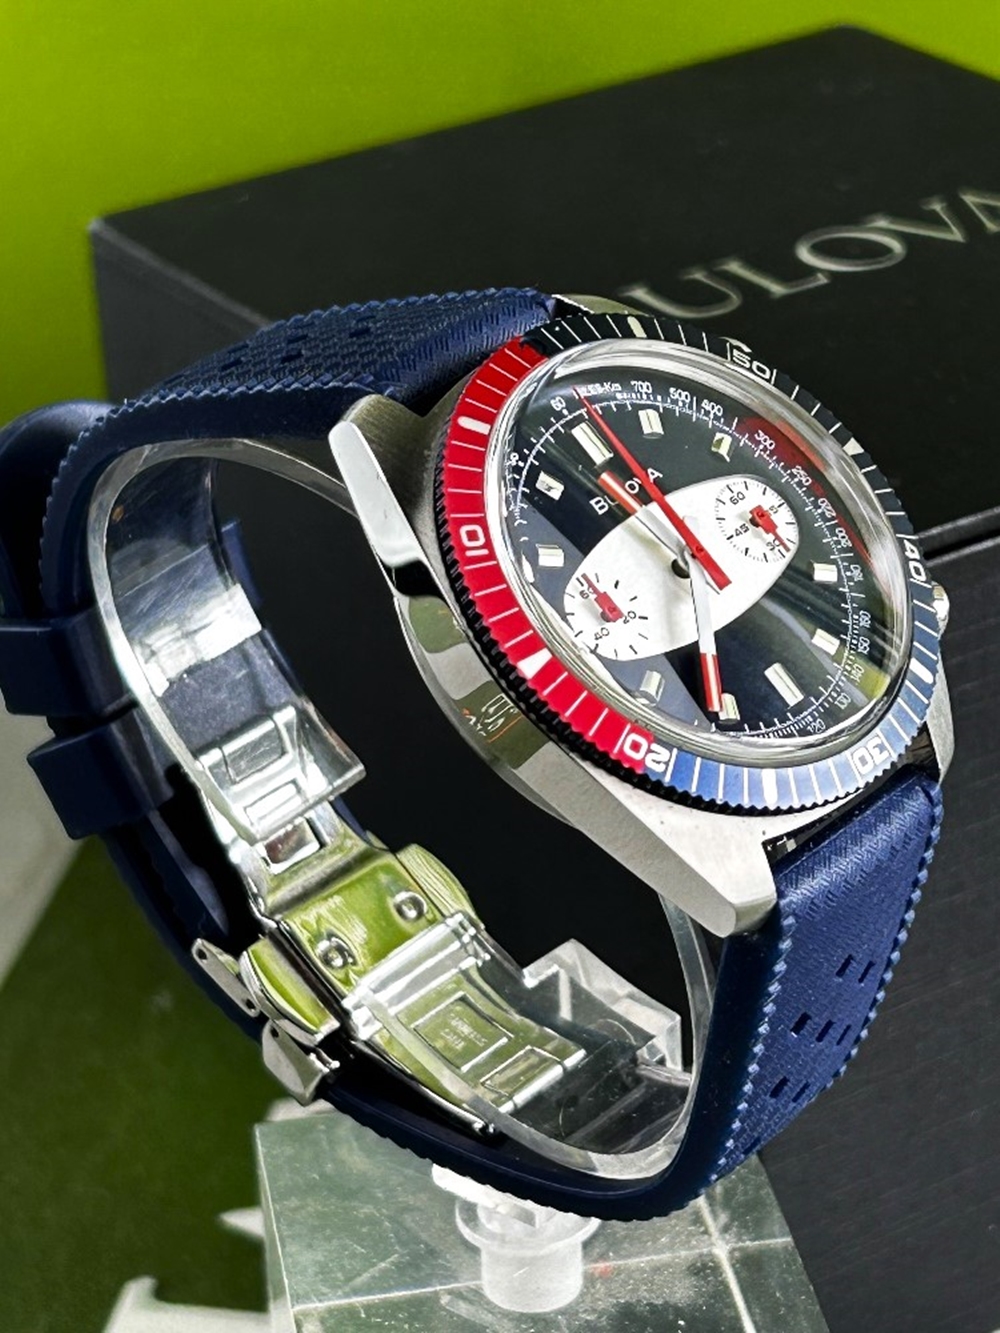 Bulova Archive Series Surfboard Chronograph Watch - Image 2 of 8